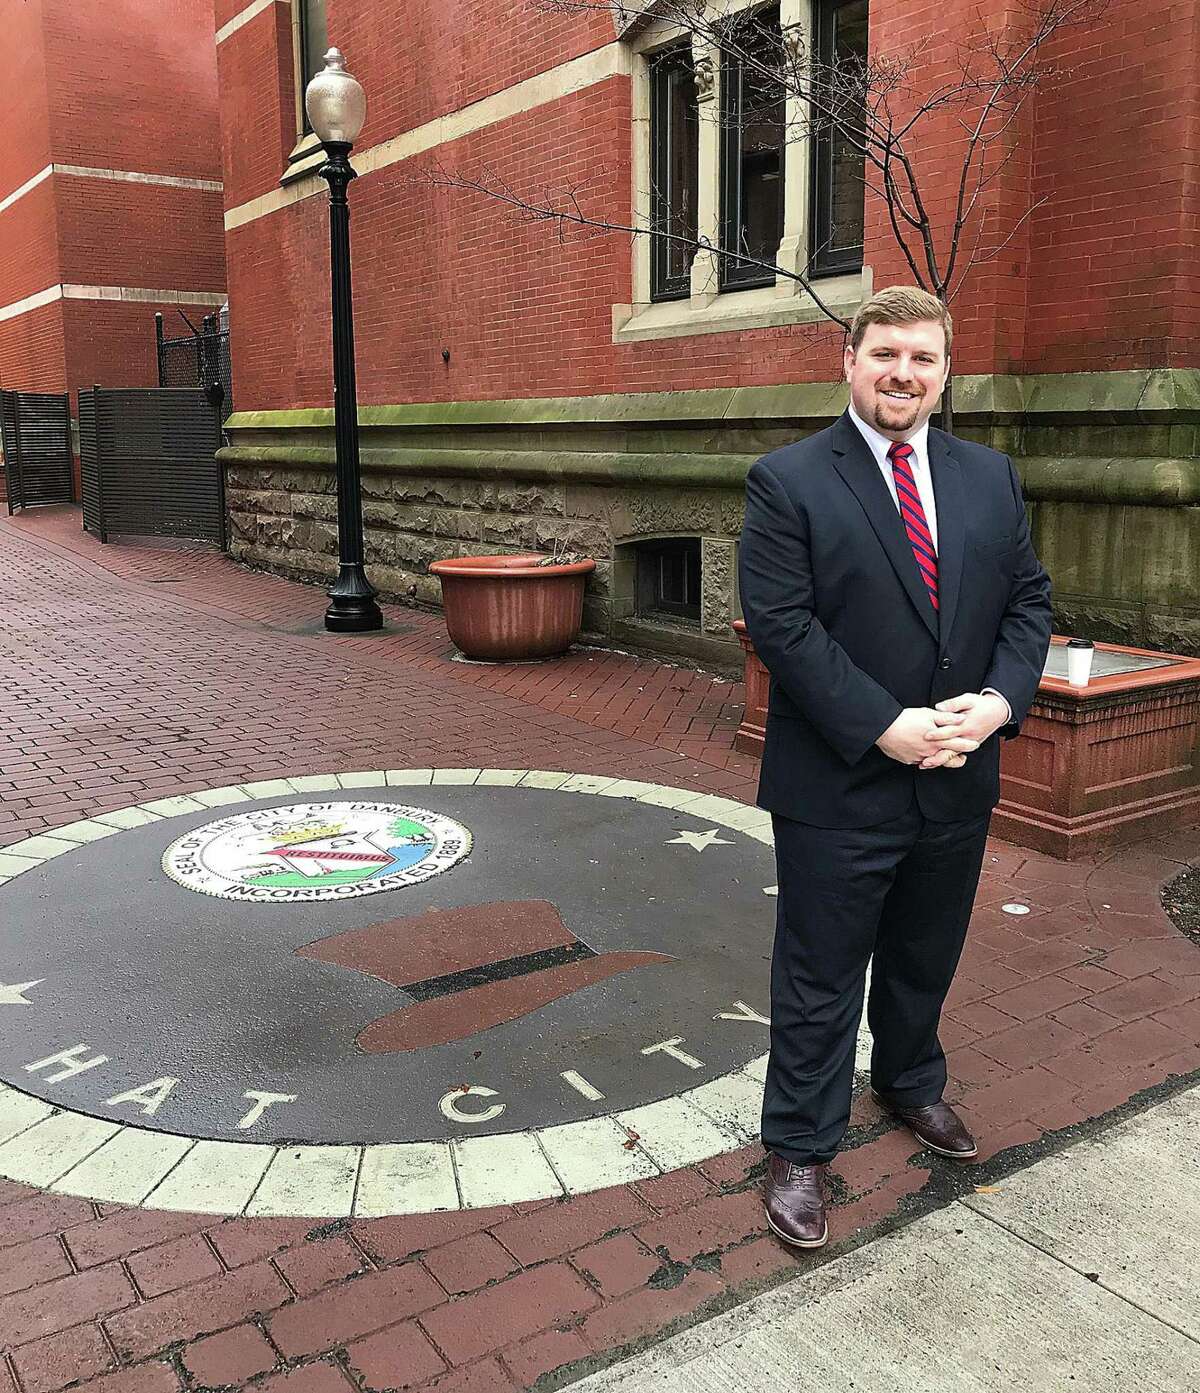 Newly named Greater Danbury Chamber of Commerce President and CEO P.J. Prunty stands in downtown Danbury, Conn., on Thursday, Feb. 15, 2018.